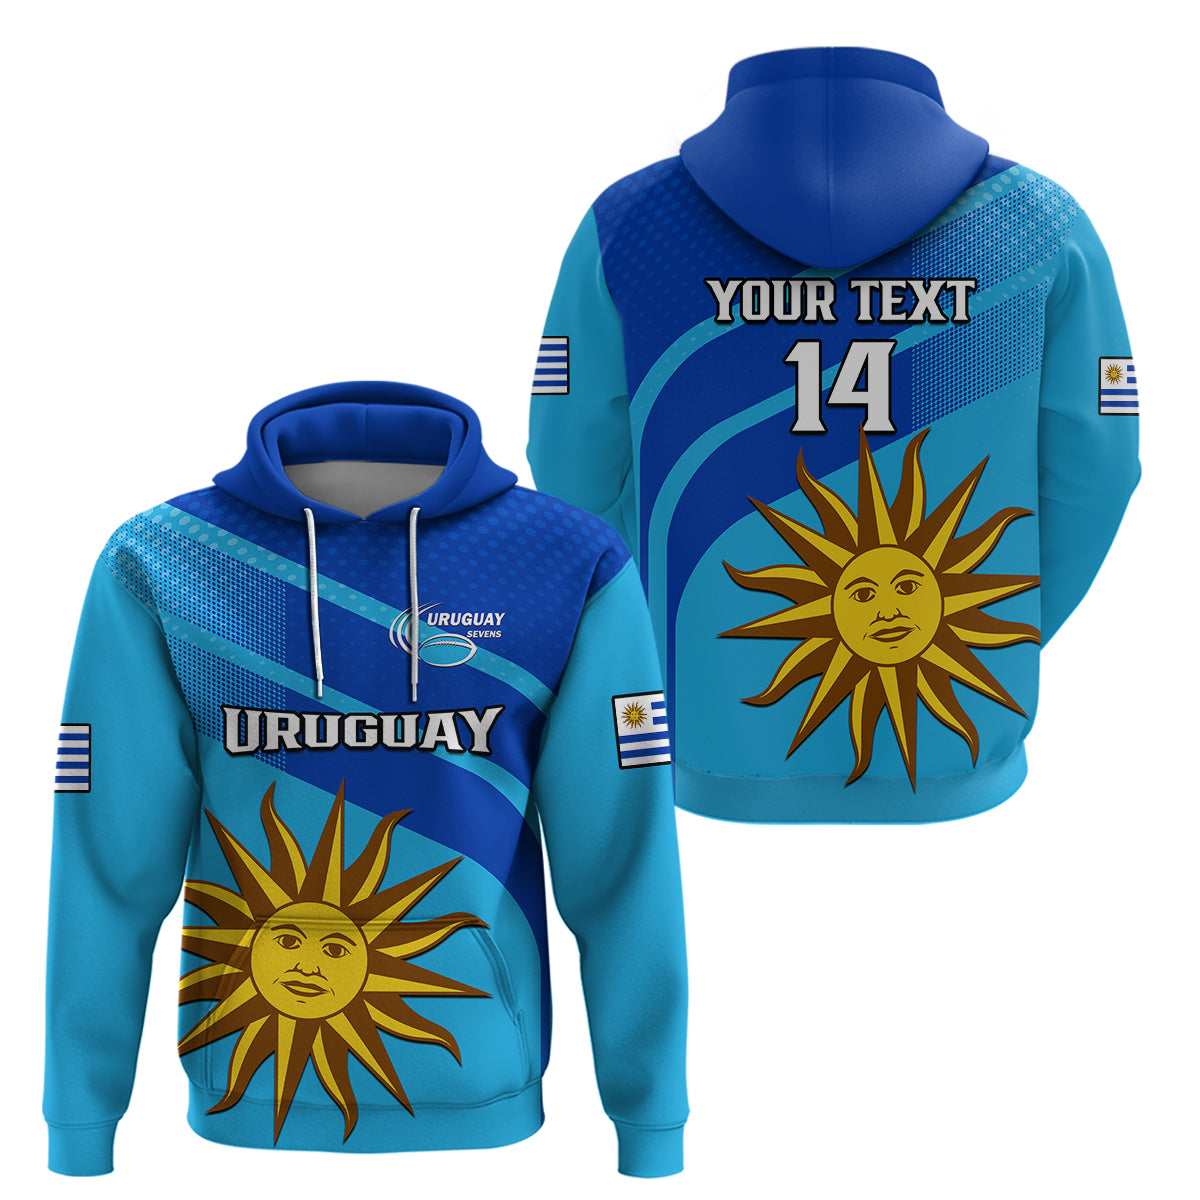 custom-text-and-number-uruguay-rugby-7s-sporty-style-hoodie